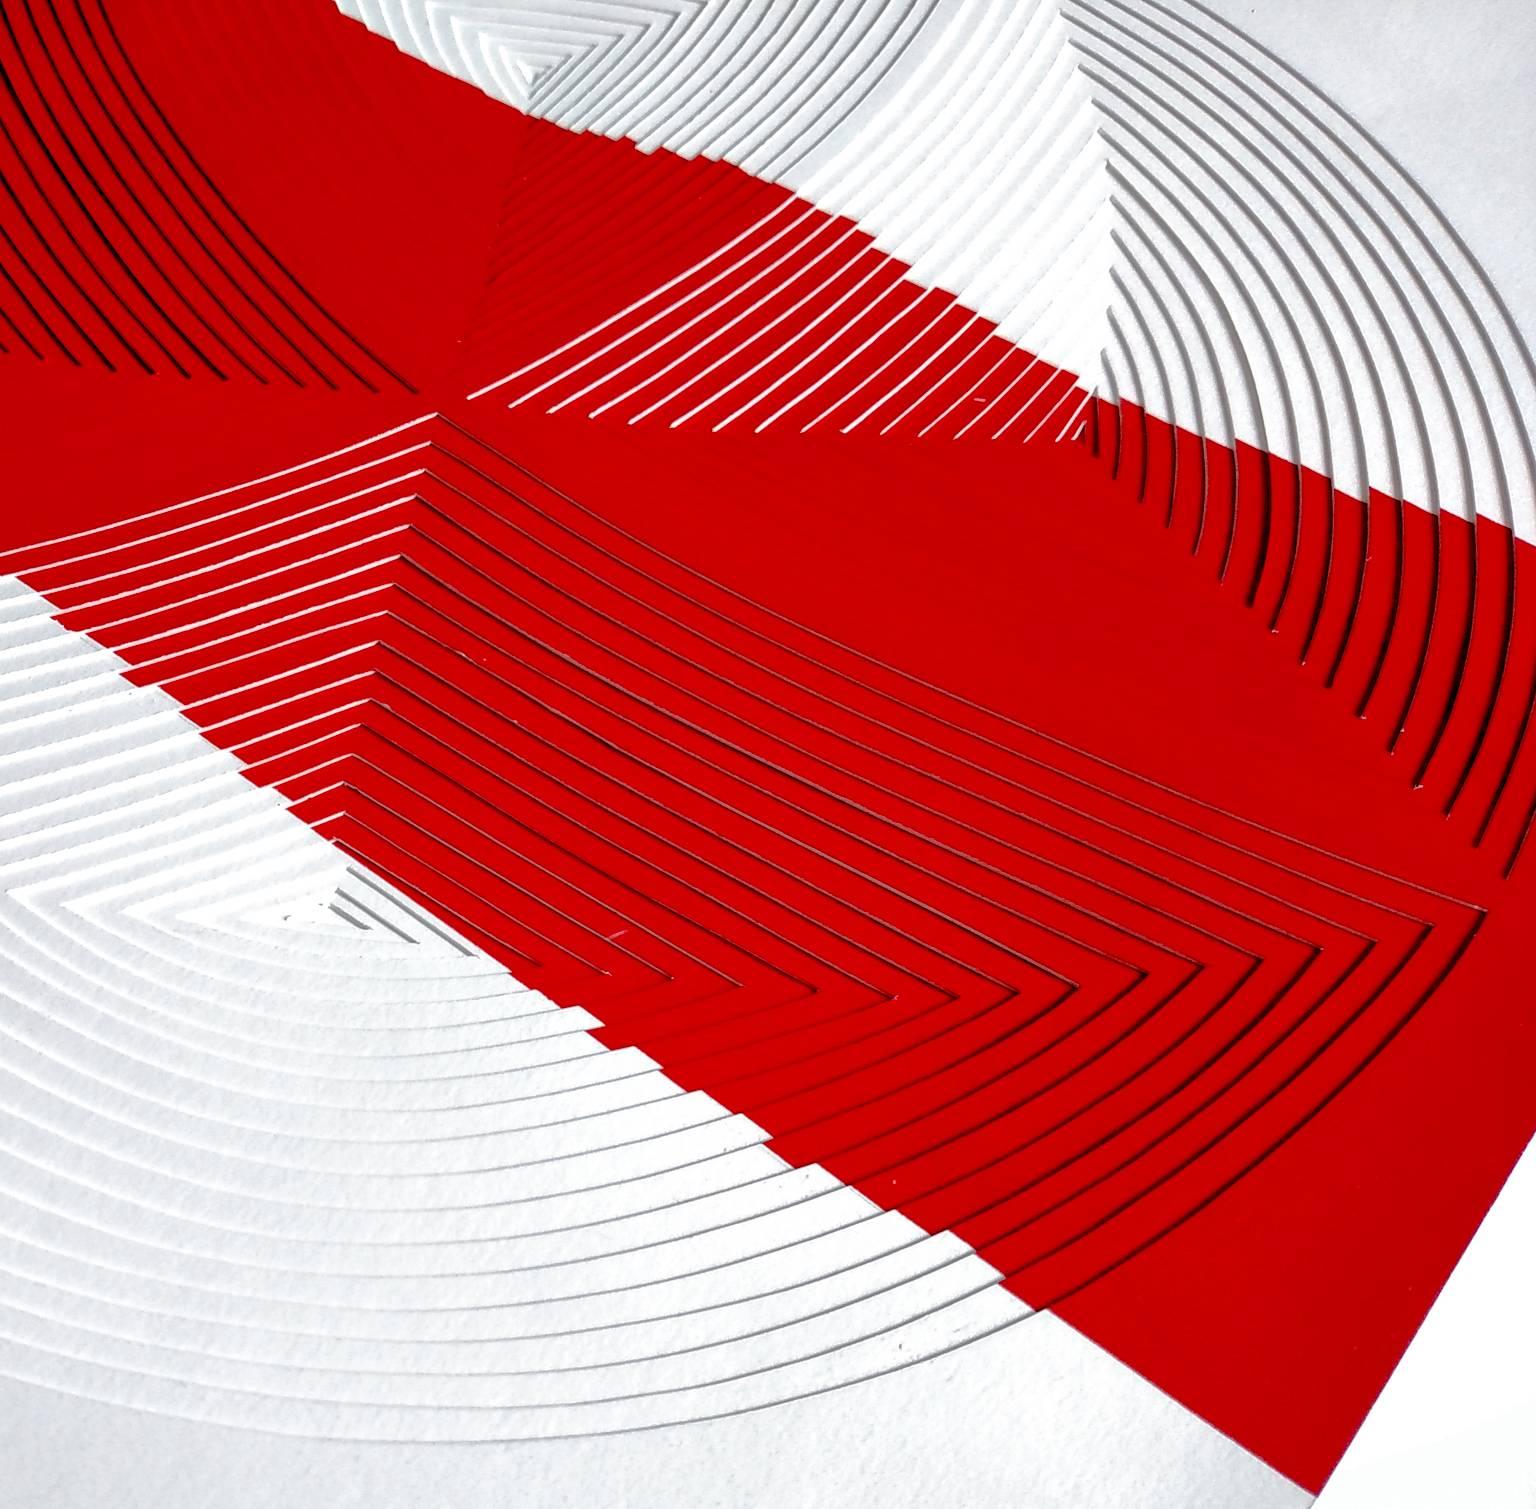 Cut w/ Surgical Scalpel on 2 ply Museum Board: 'Red & White Stripe Circle-In' - Contemporary Mixed Media Art by Elizabeth Gregory-Gruen